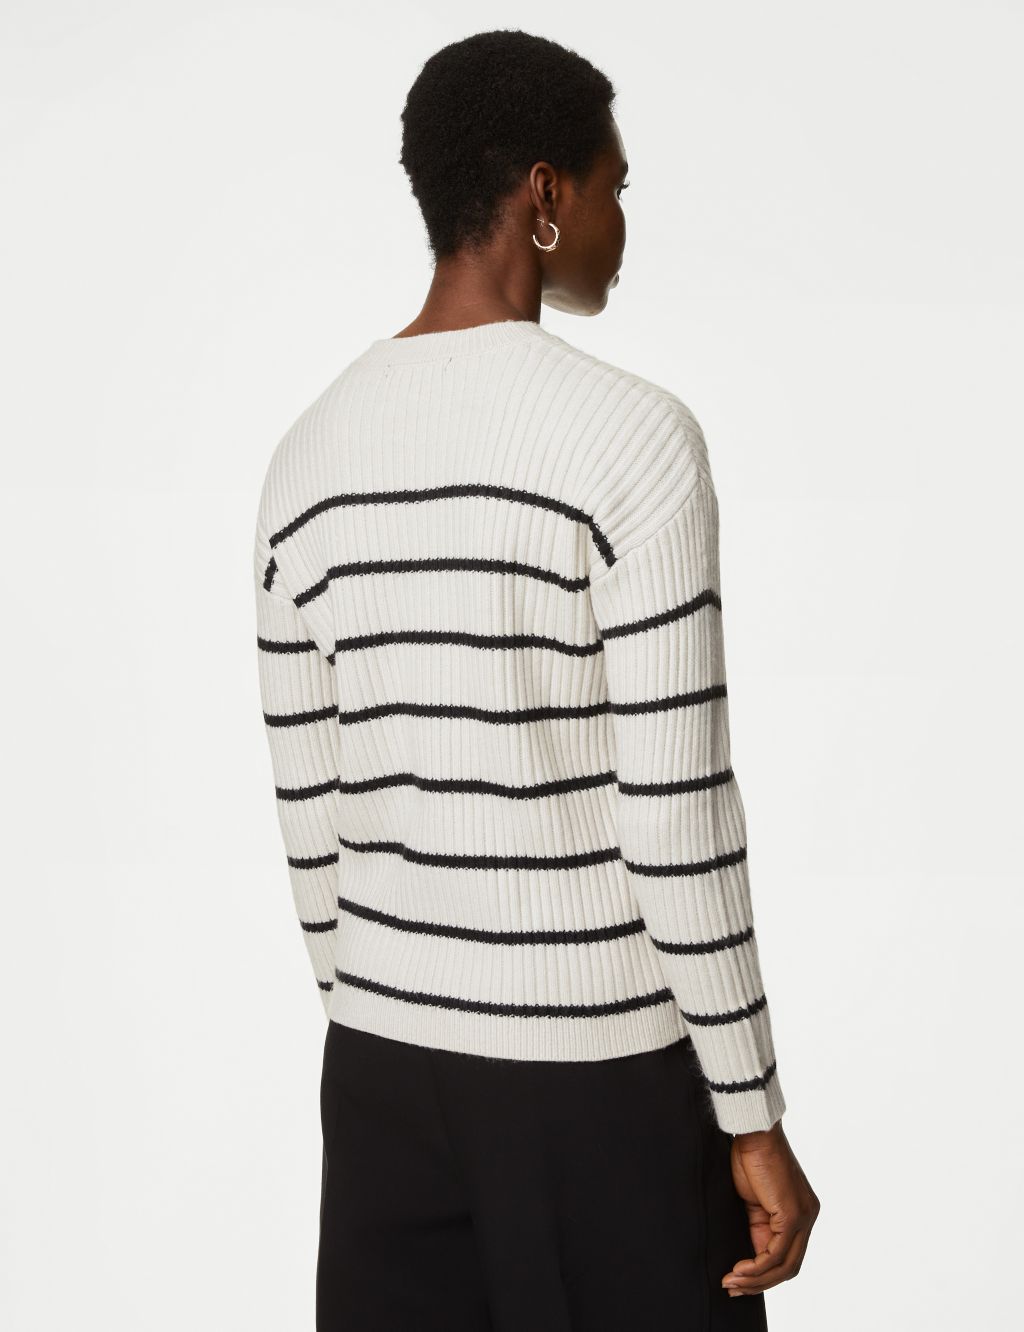 Ribbed Striped Knitted Jumper image 5